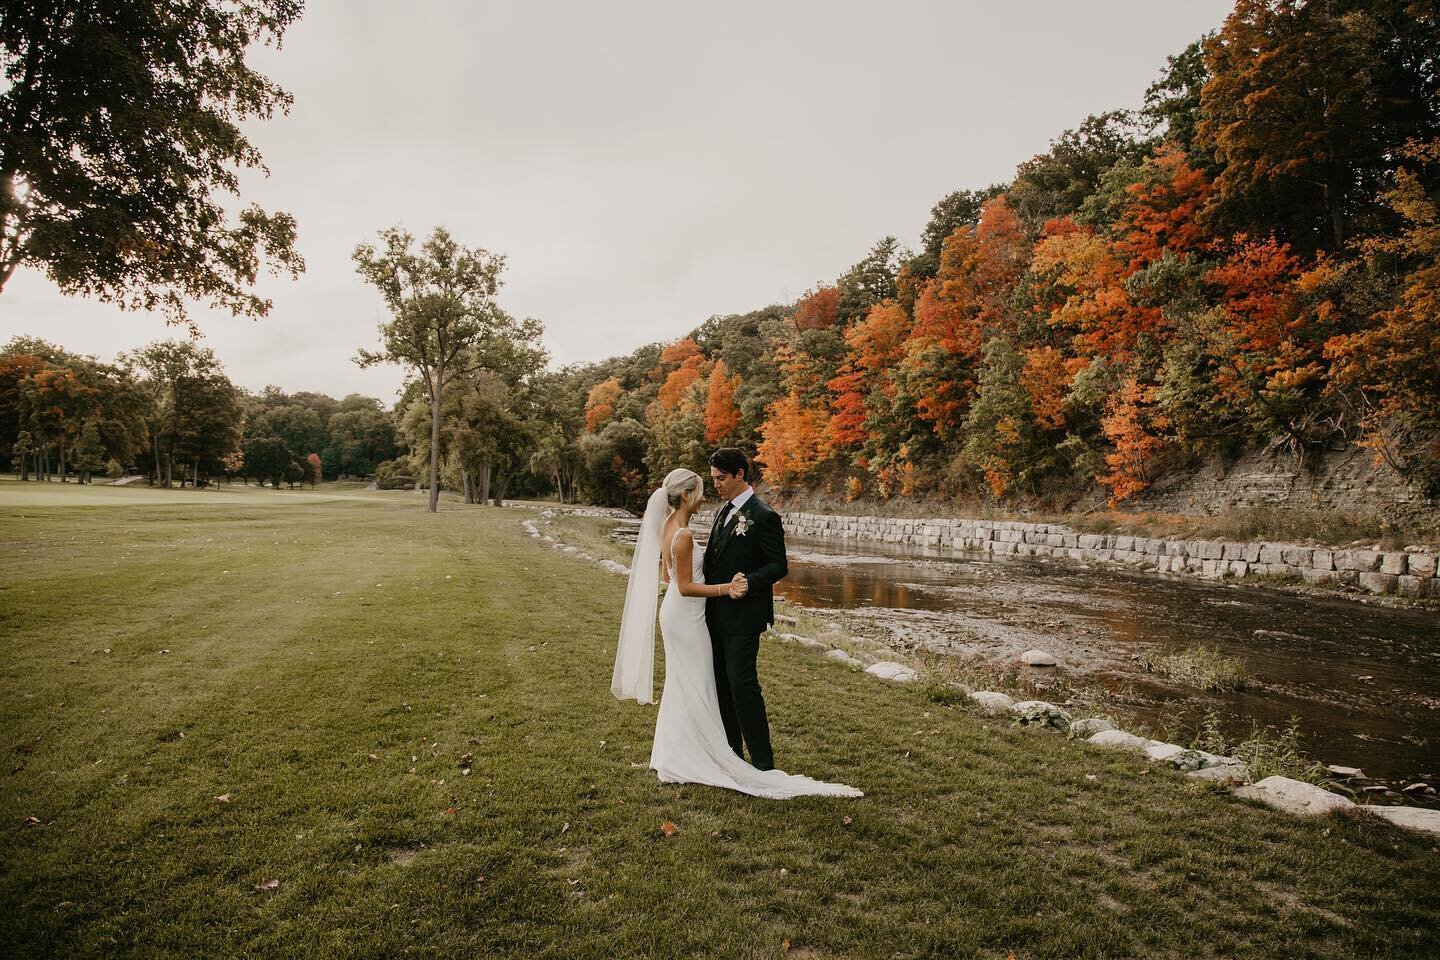 This weekend marks our final wedding weekend of the year! We are so beyond grateful to all of our couples this year, for allowing us to be apart of making memories on one of the most special days of their lives. From what seemed to be an unrealistic 